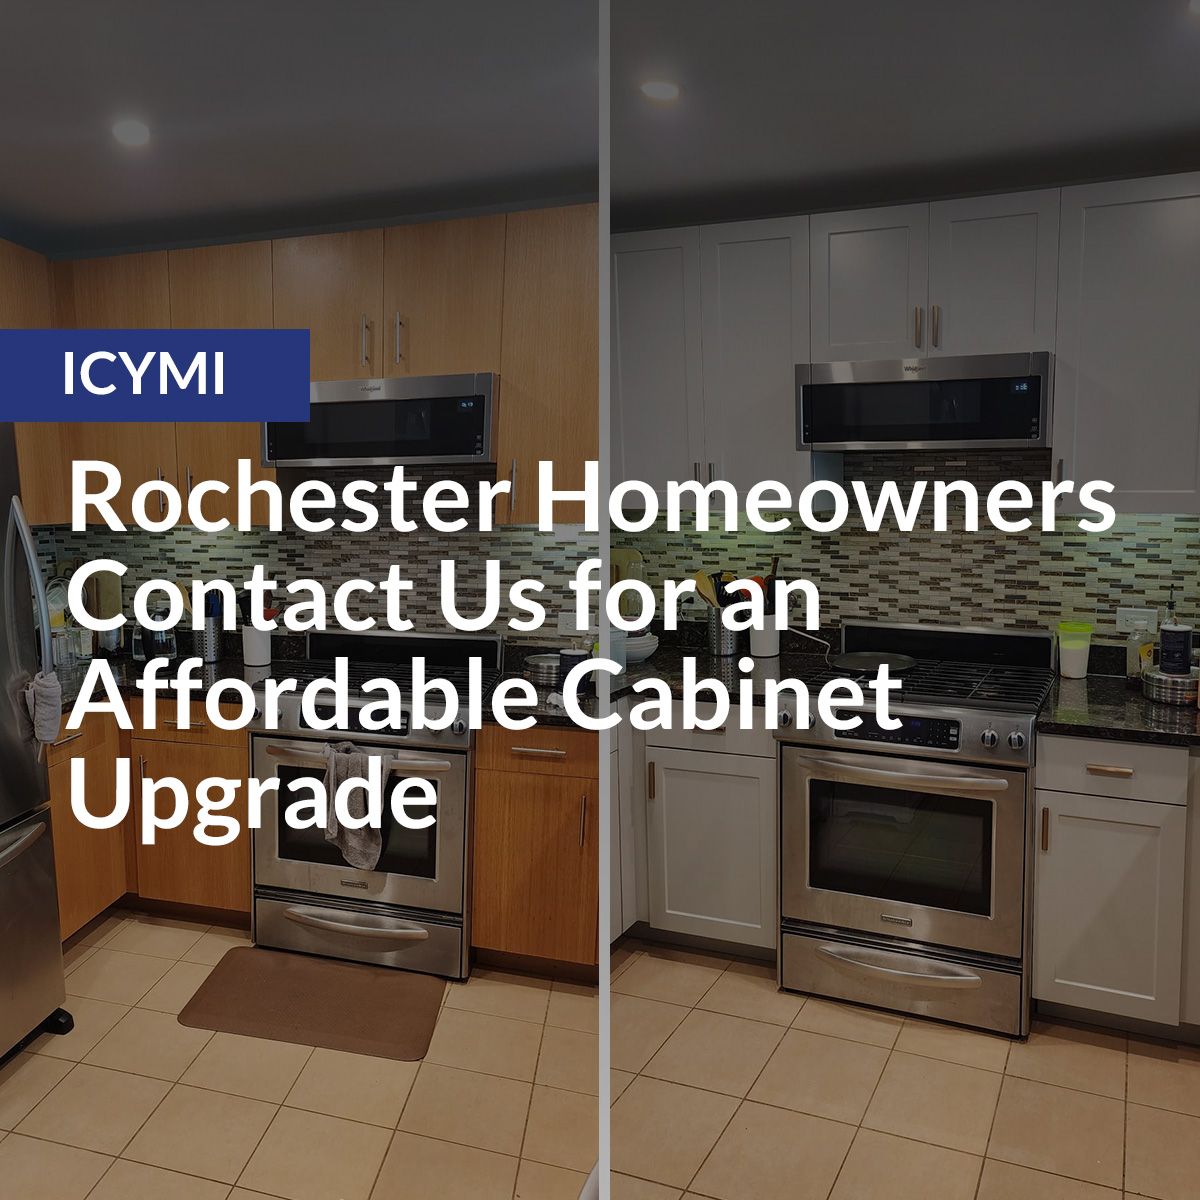 Rochester Homeowners Contact Us for an Affordable Cabinet Upgrade